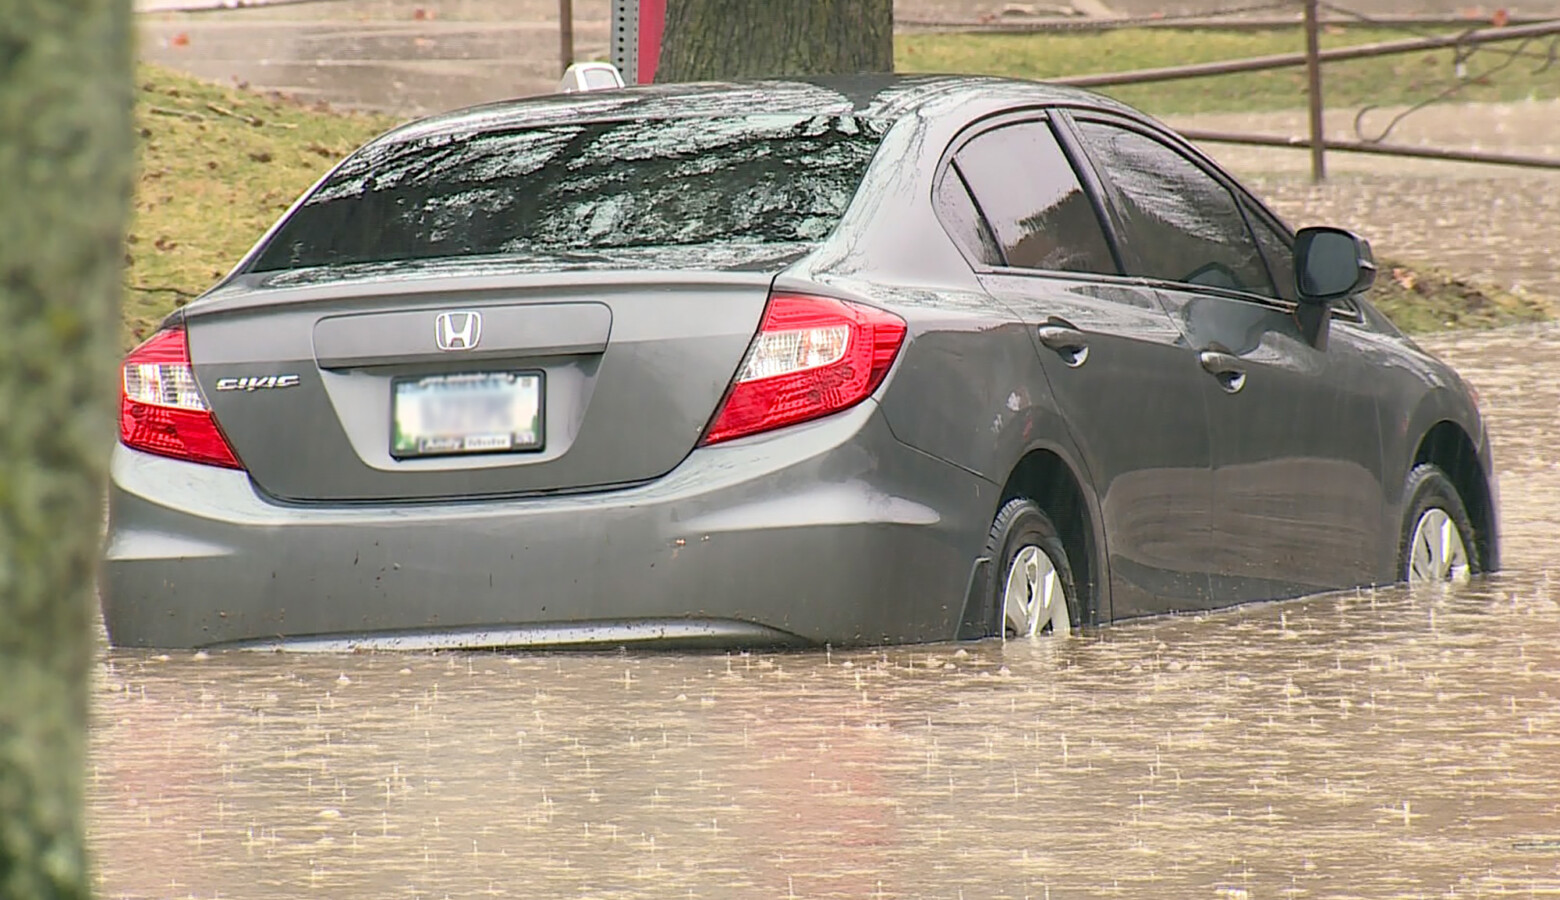 A parked car in high flood waters in Bloomington on Feb. 17, 2019. (FILE PHOTO: Steve Burns/WTIU)